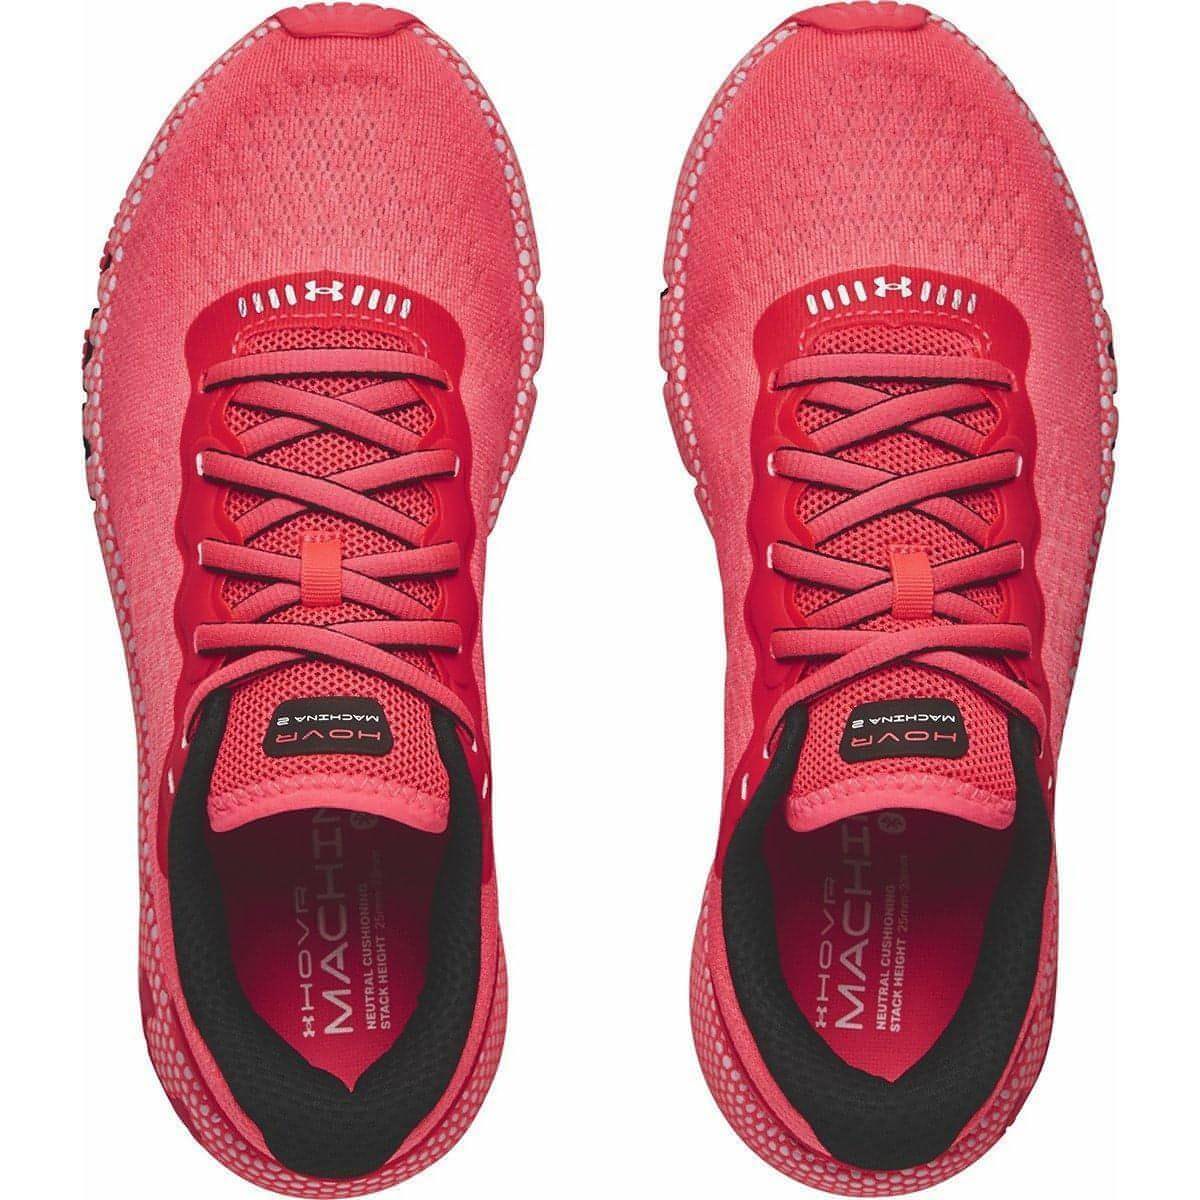 Under Armour HOVR Machina 2 Womens Running Shoes - Pink - Start Fitness